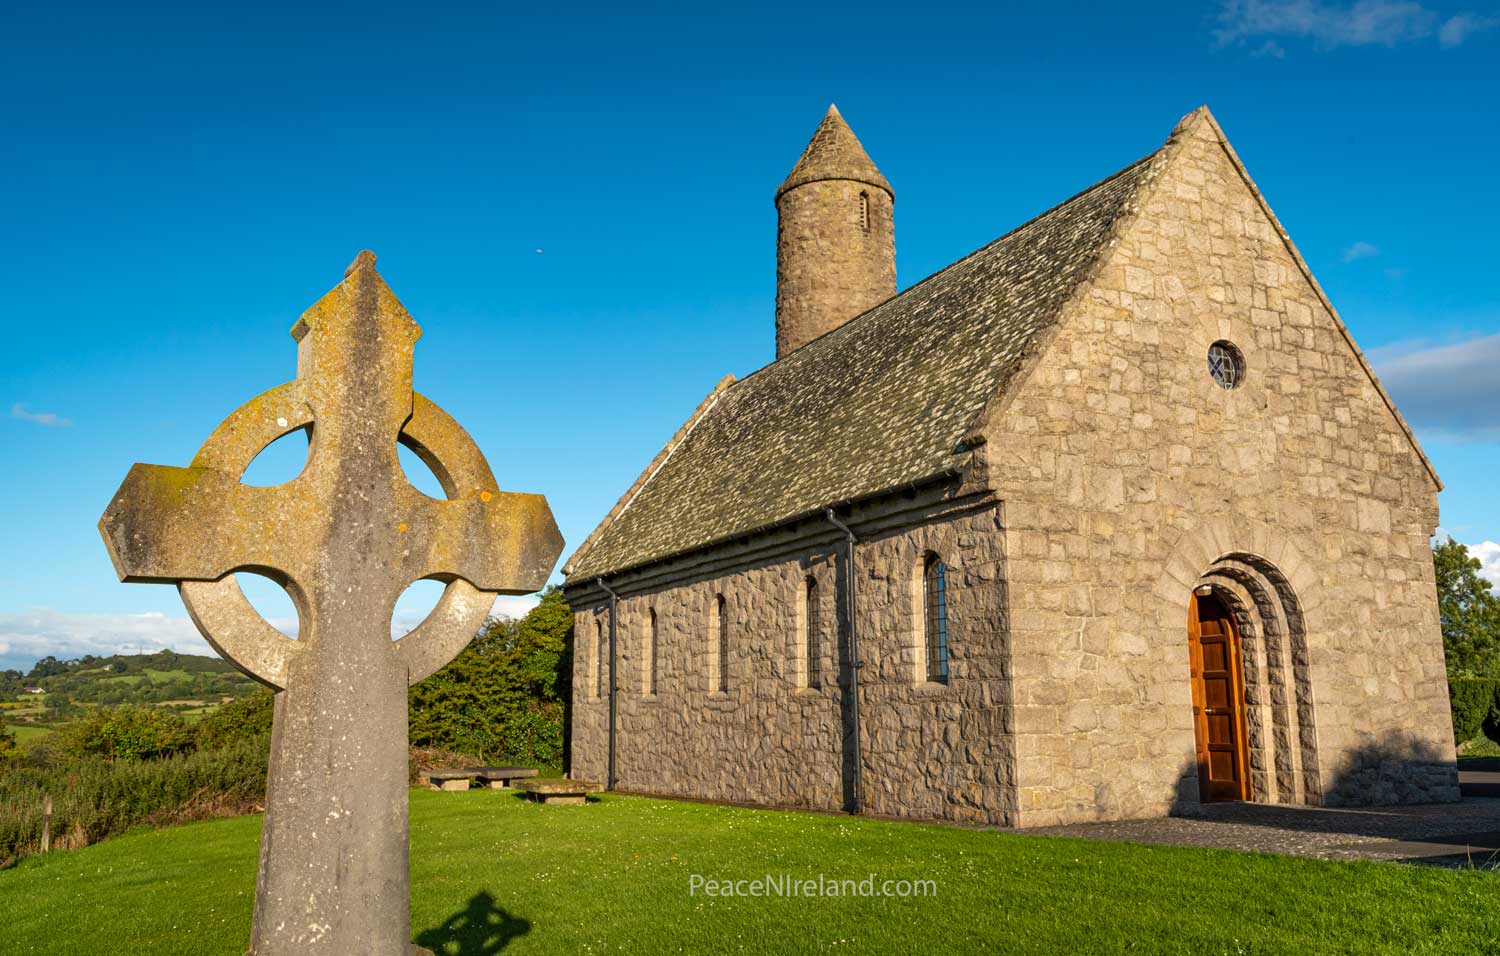 The St Patrick Memorial Church (Church of Ireland) at Saul, County Down. On this site Patrick built the first Christian Church in Ireland in 432AD.